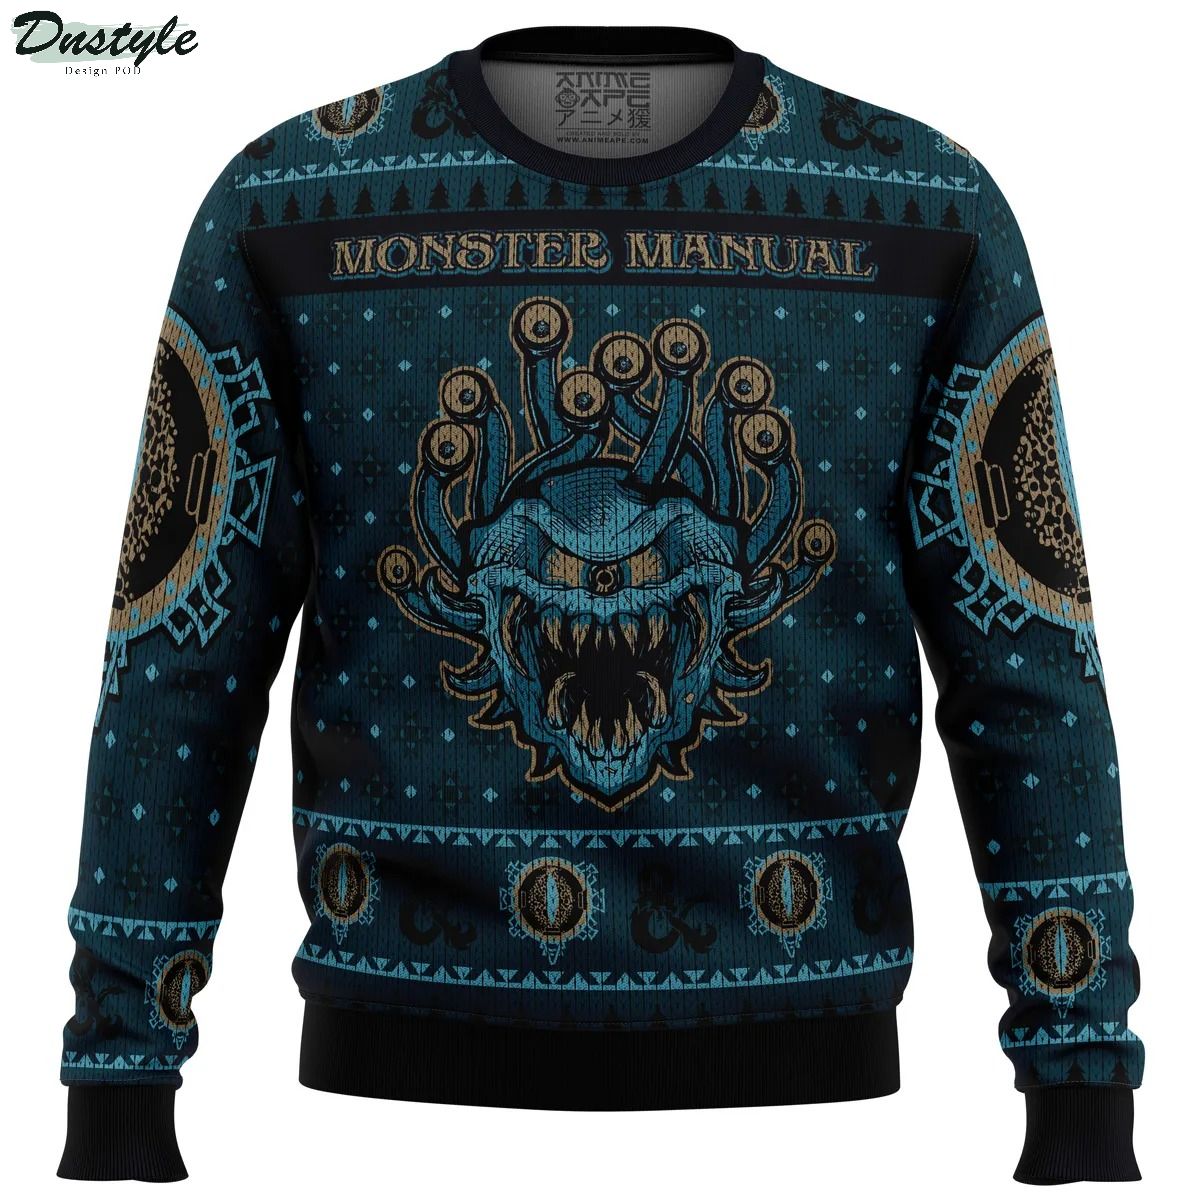 Dungeons and Dragons Monster Manual Ugly Christmas Sweater